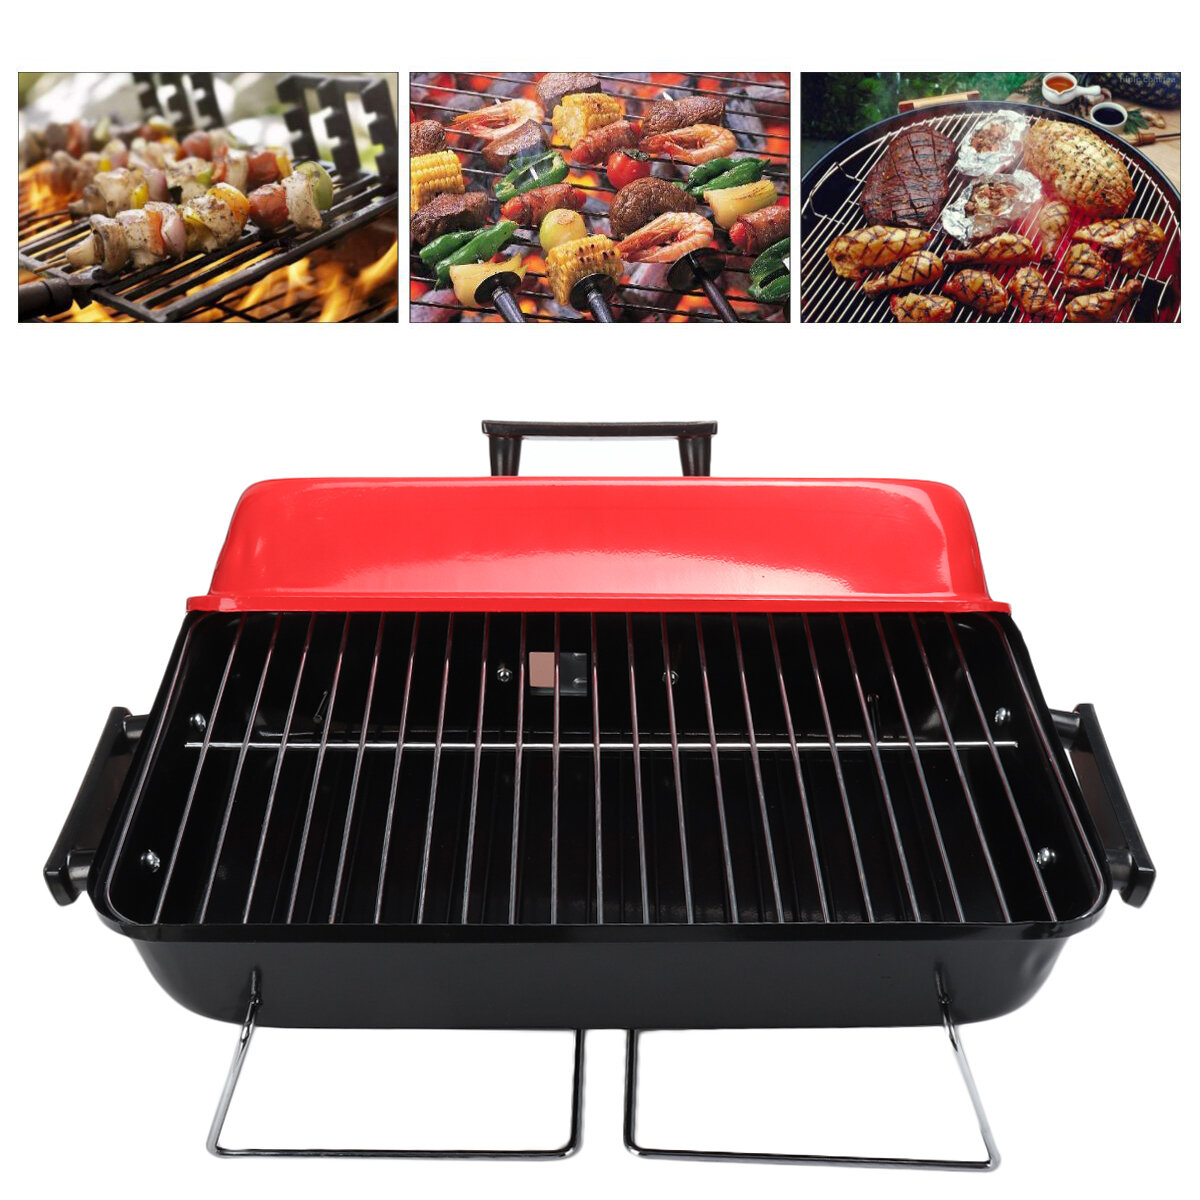 Portable Folding BBQ Grill Barbecue Charcoal Grills Wire Meshes Tools For Outdoor Camping Cooking Picnics Hiking